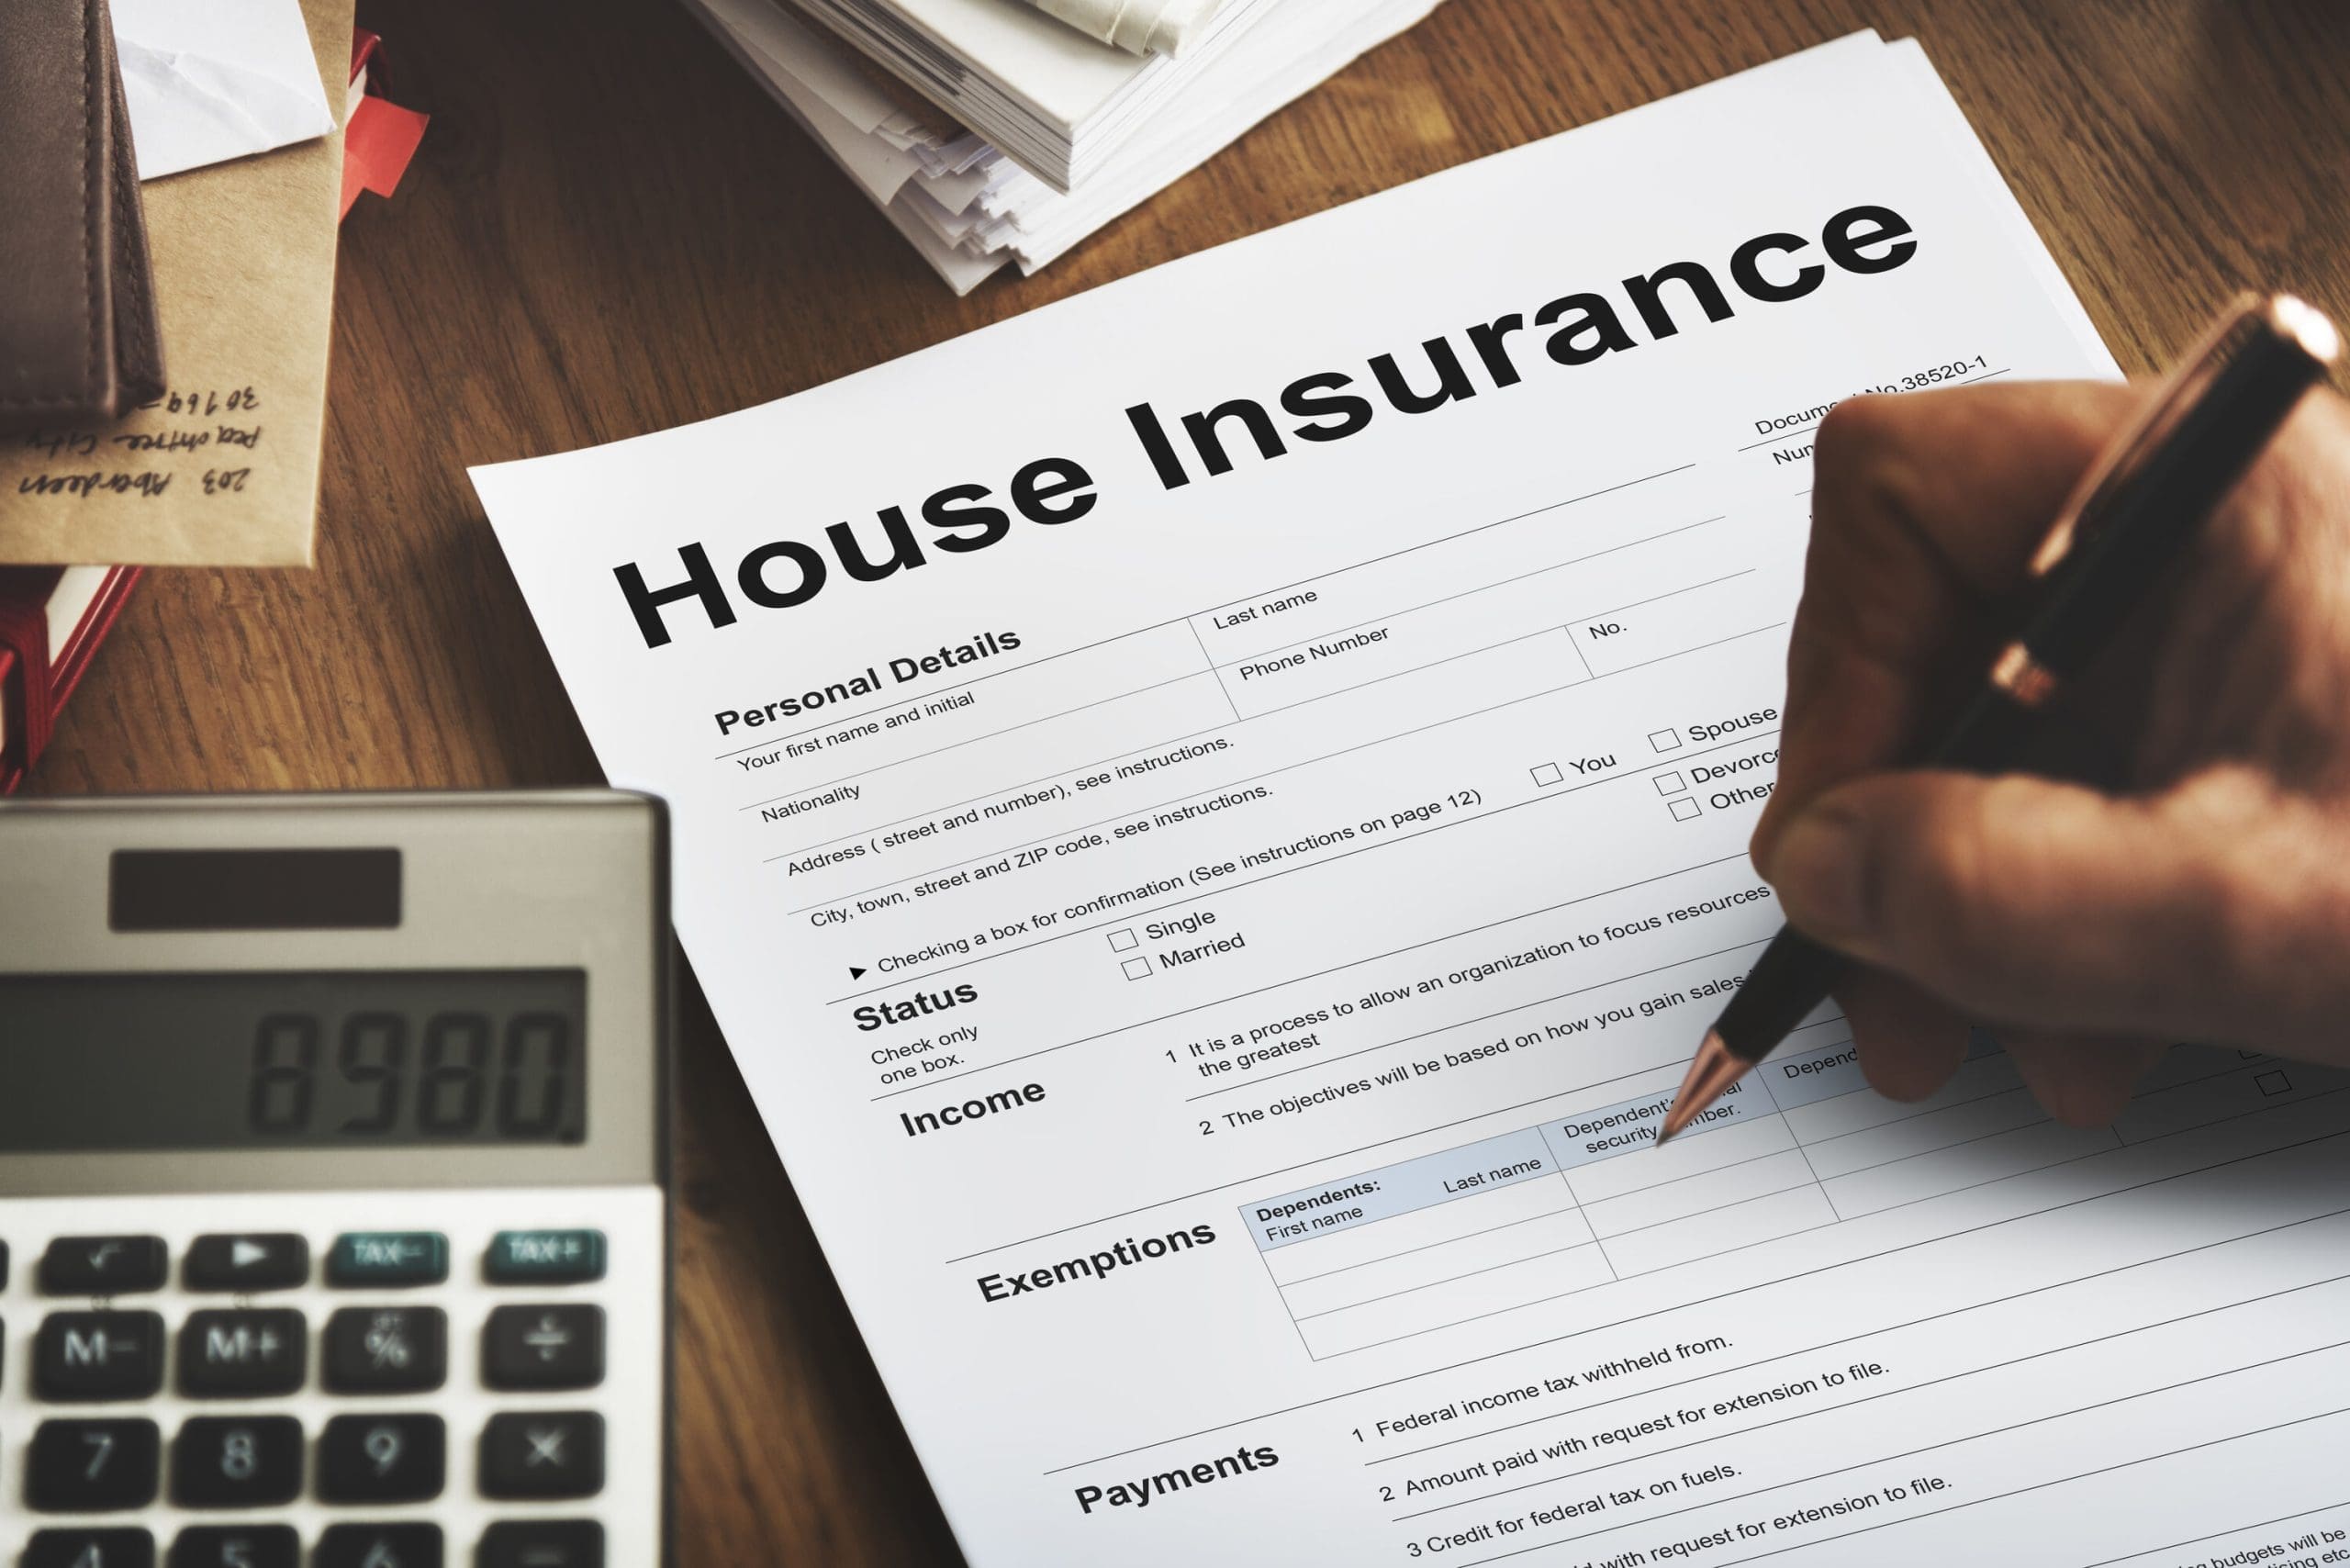 Which insurance is best for home?, home insurance in ireland, house insurance in ireland, home insurance ireland
house insurance ireland